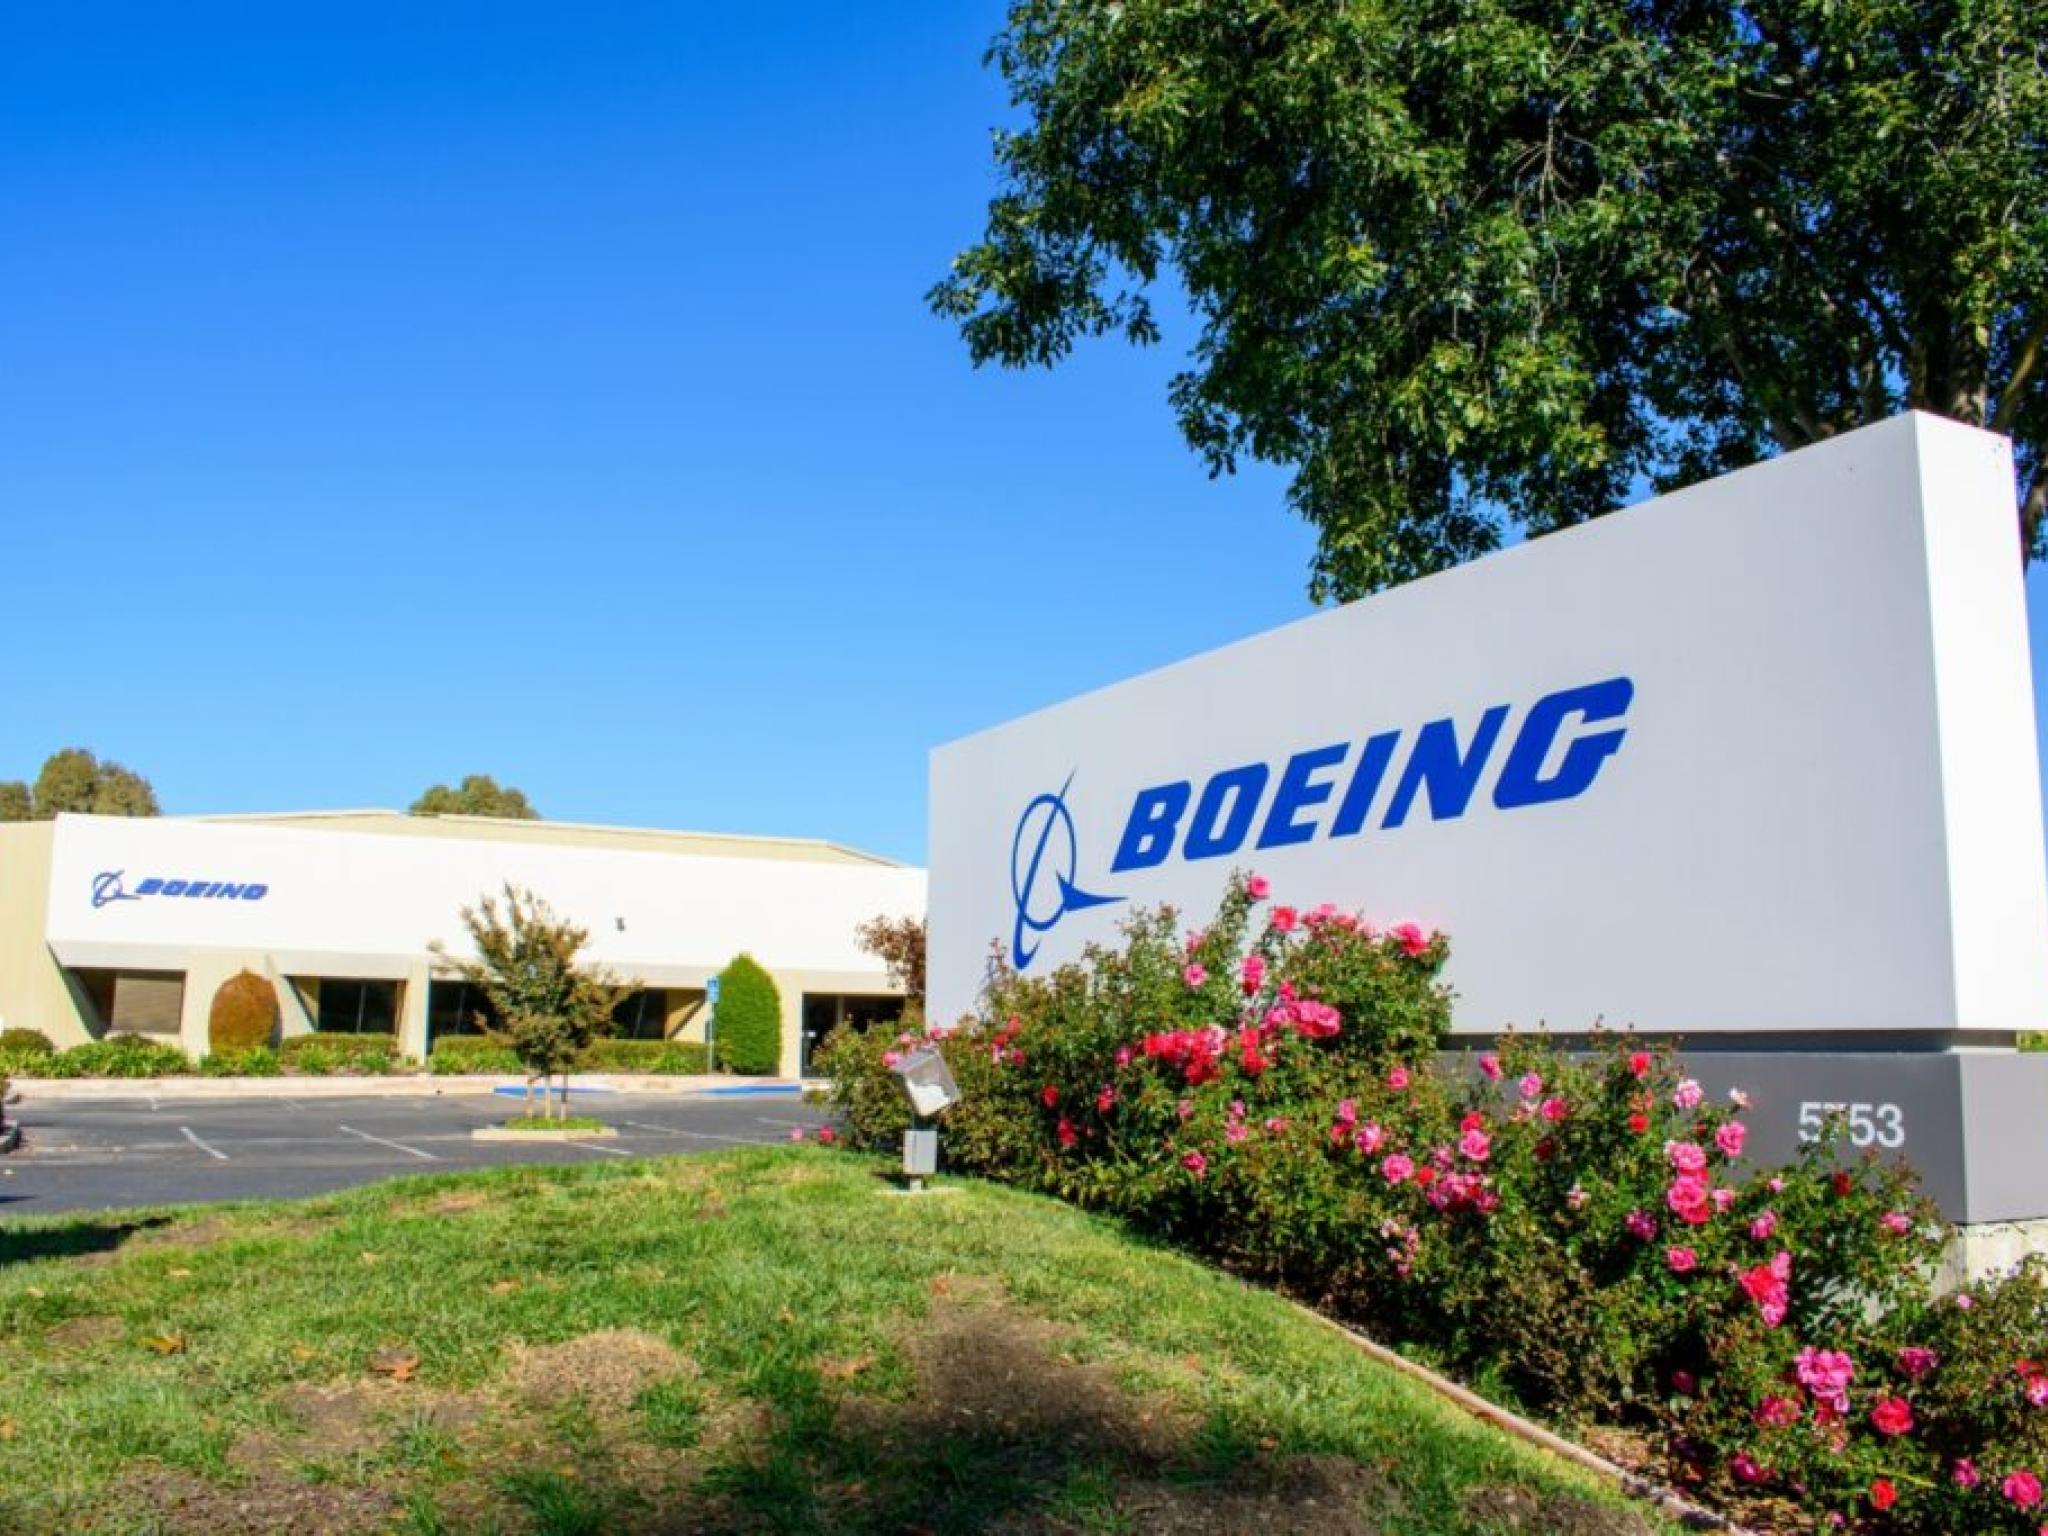  boeing-offers-to-acquire-spirit-aerosystems-in-35-per-share-deal-funded-mostly-by-stock-report 